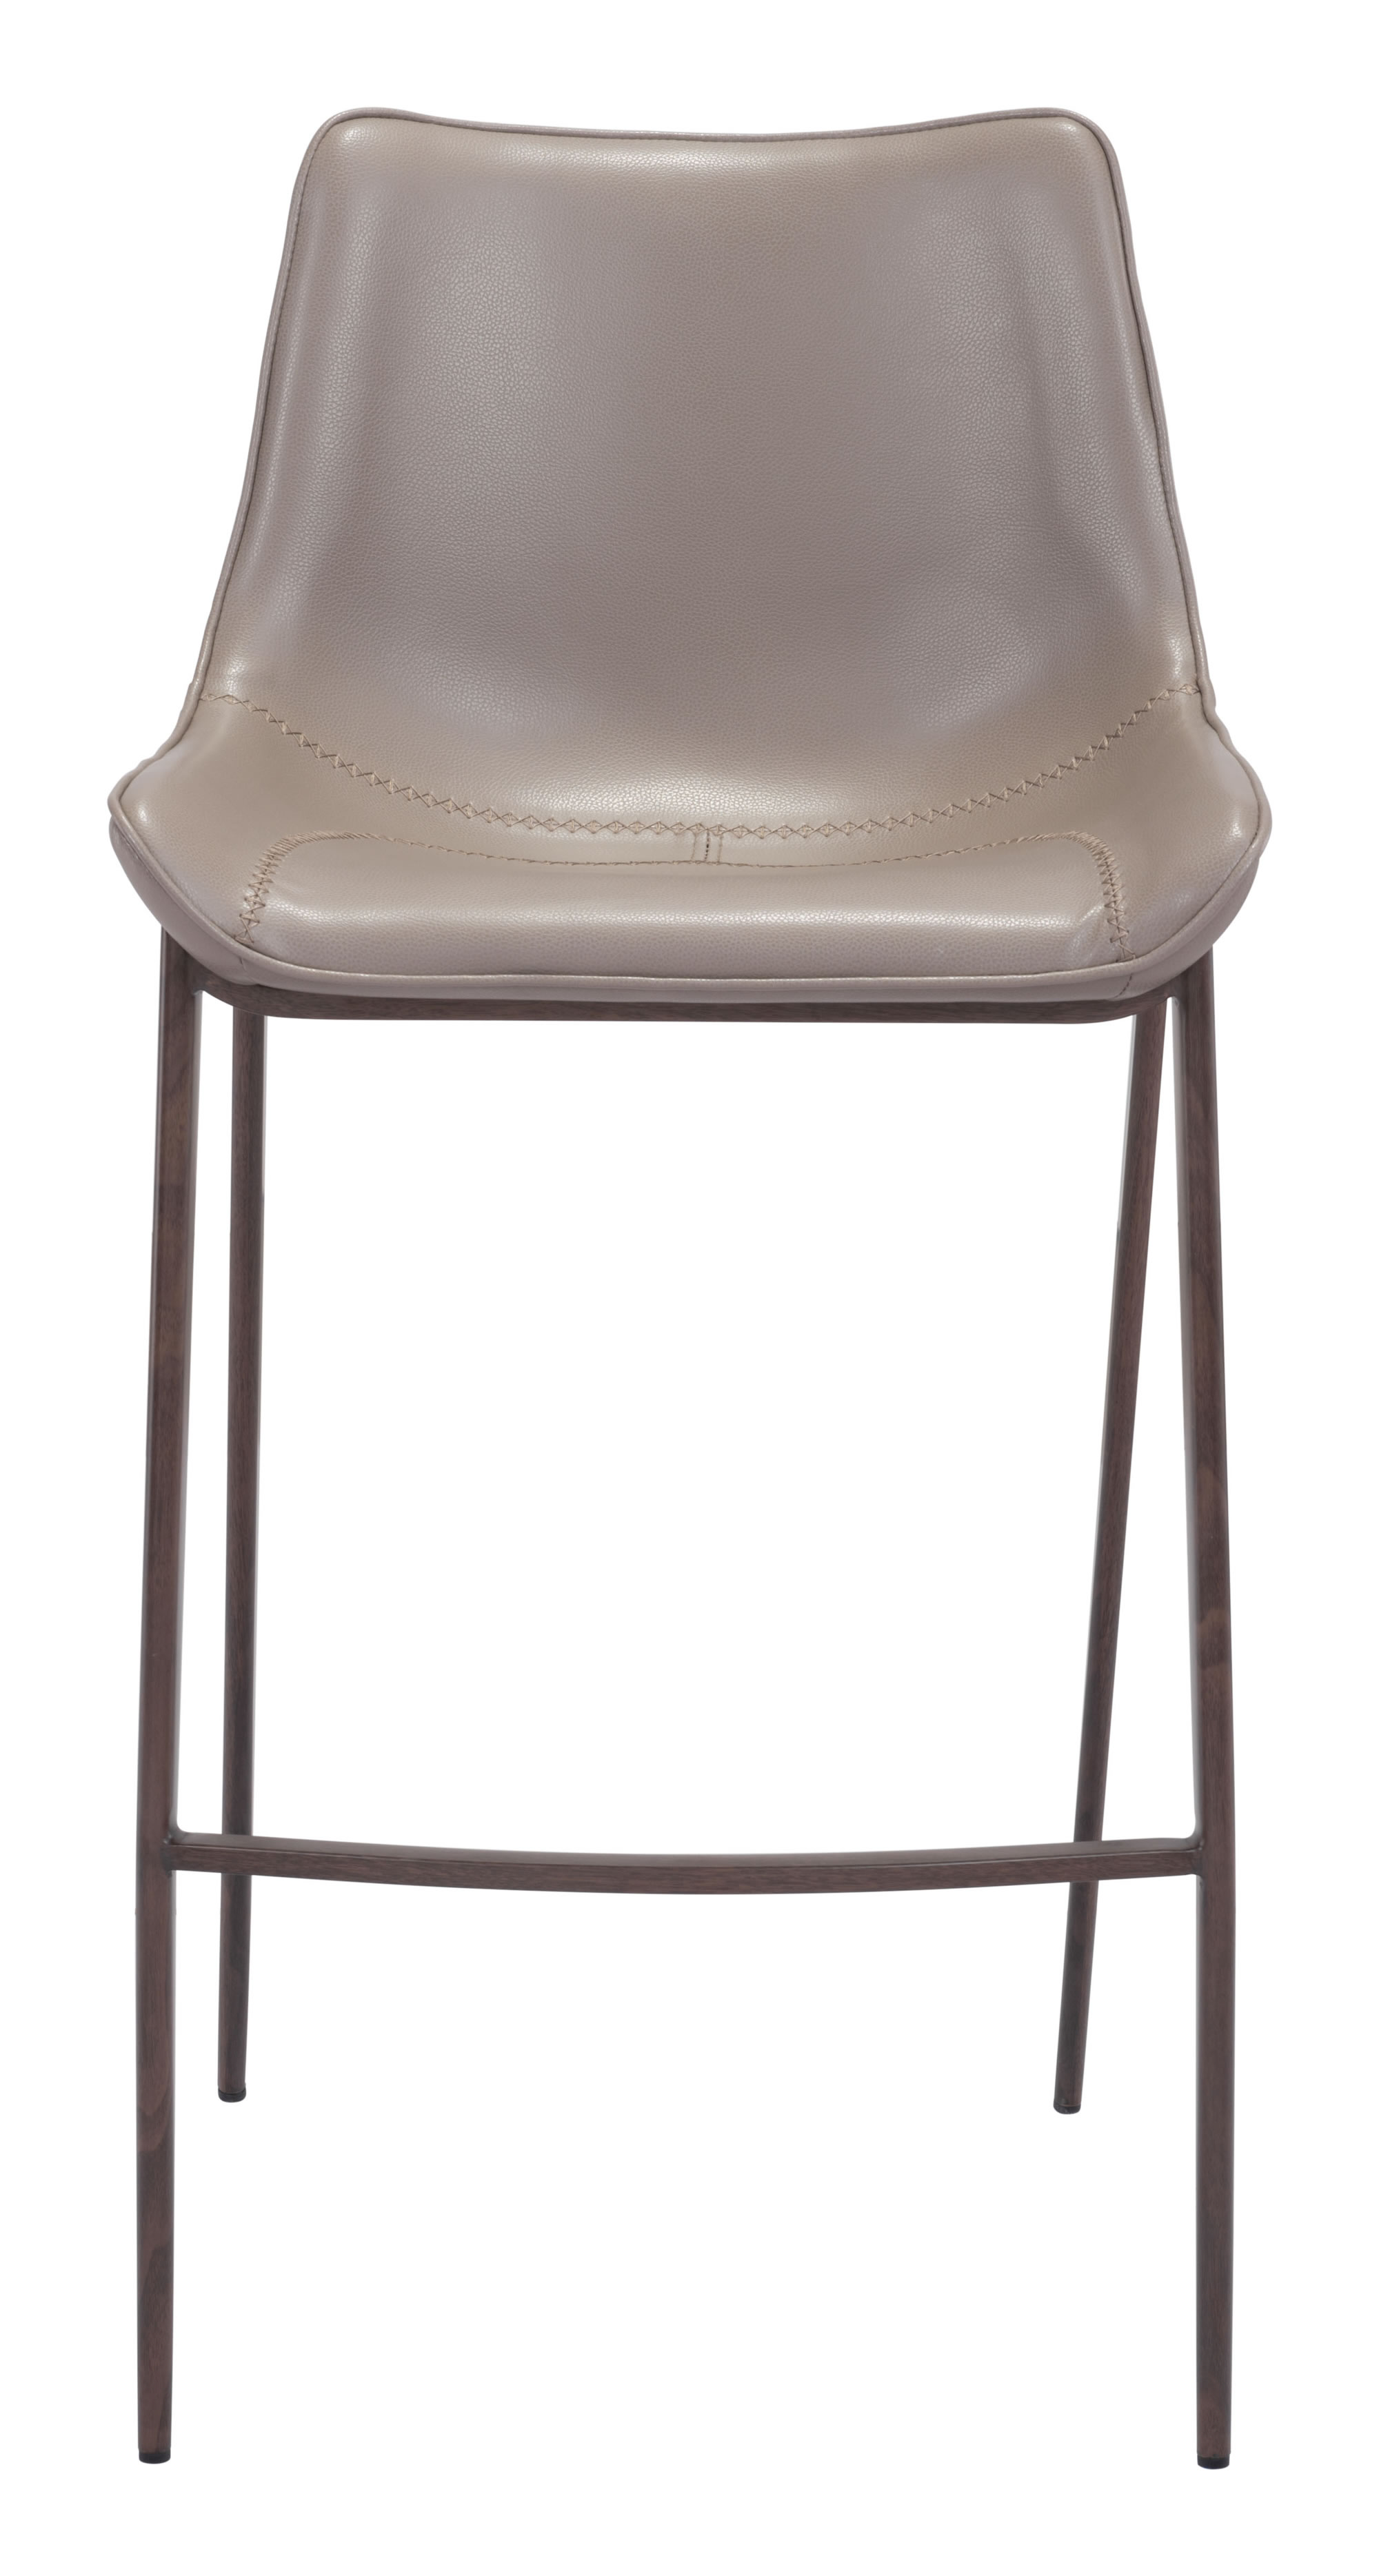 20.7" x 21.7" x 43.3" Gray & Walnut, Leatherette, Brushed Stainless Steel, Bar Chair - Set of 2